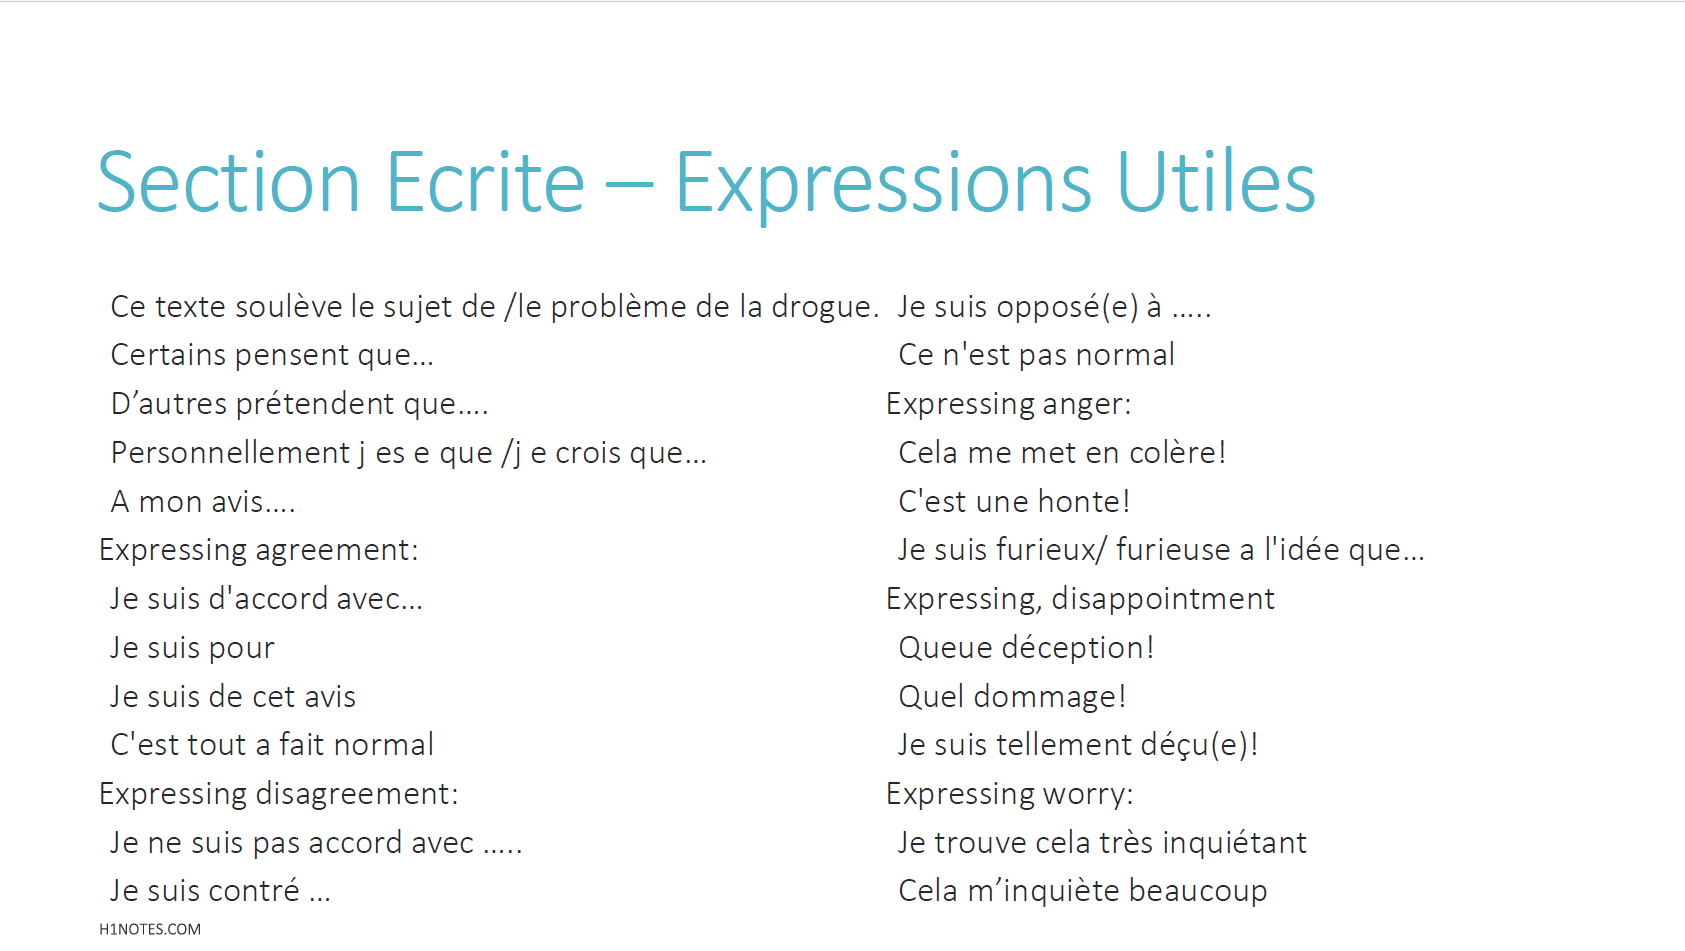 H1 Notes French Notes Expressions